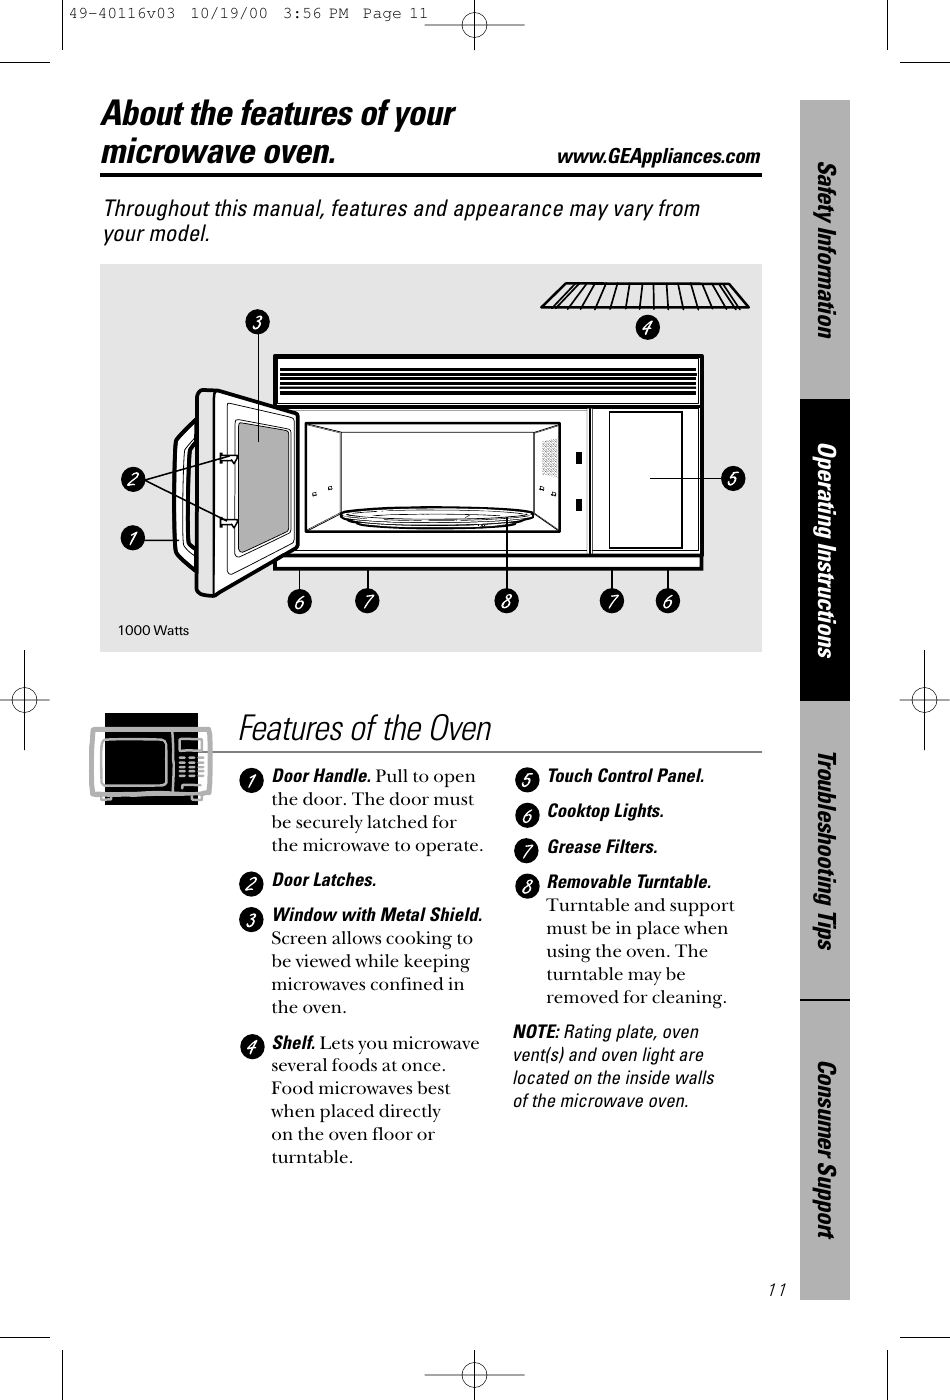 Consumer SupportTroubleshooting TipsOperating InstructionsSafety Information11About the features of your microwave oven.www.GEAppliances.comThroughout this manual, features and appearance may vary from your model.Features of the OvenDoor Handle. Pull to openthe door. The door mustbe securely latched forthe microwave to operate.Door Latches. Window with Metal Shield.Screen allows cooking tobe viewed while keepingmicrowaves confined inthe oven.Shelf. Lets you microwaveseveral foods at once.Food microwaves bestwhen placed directly on the oven floor orturntable.Touch Control Panel. Cooktop Lights.Grease Filters.Removable Turntable.Turntable and supportmust be in place whenusing the oven. Theturntable may beremoved for cleaning.NOTE: Rating plate, oven vent(s) and oven light arelocated on the inside walls of the microwave oven.1000 Watts49-40116v03  10/19/00  3:56 PM  Page 11